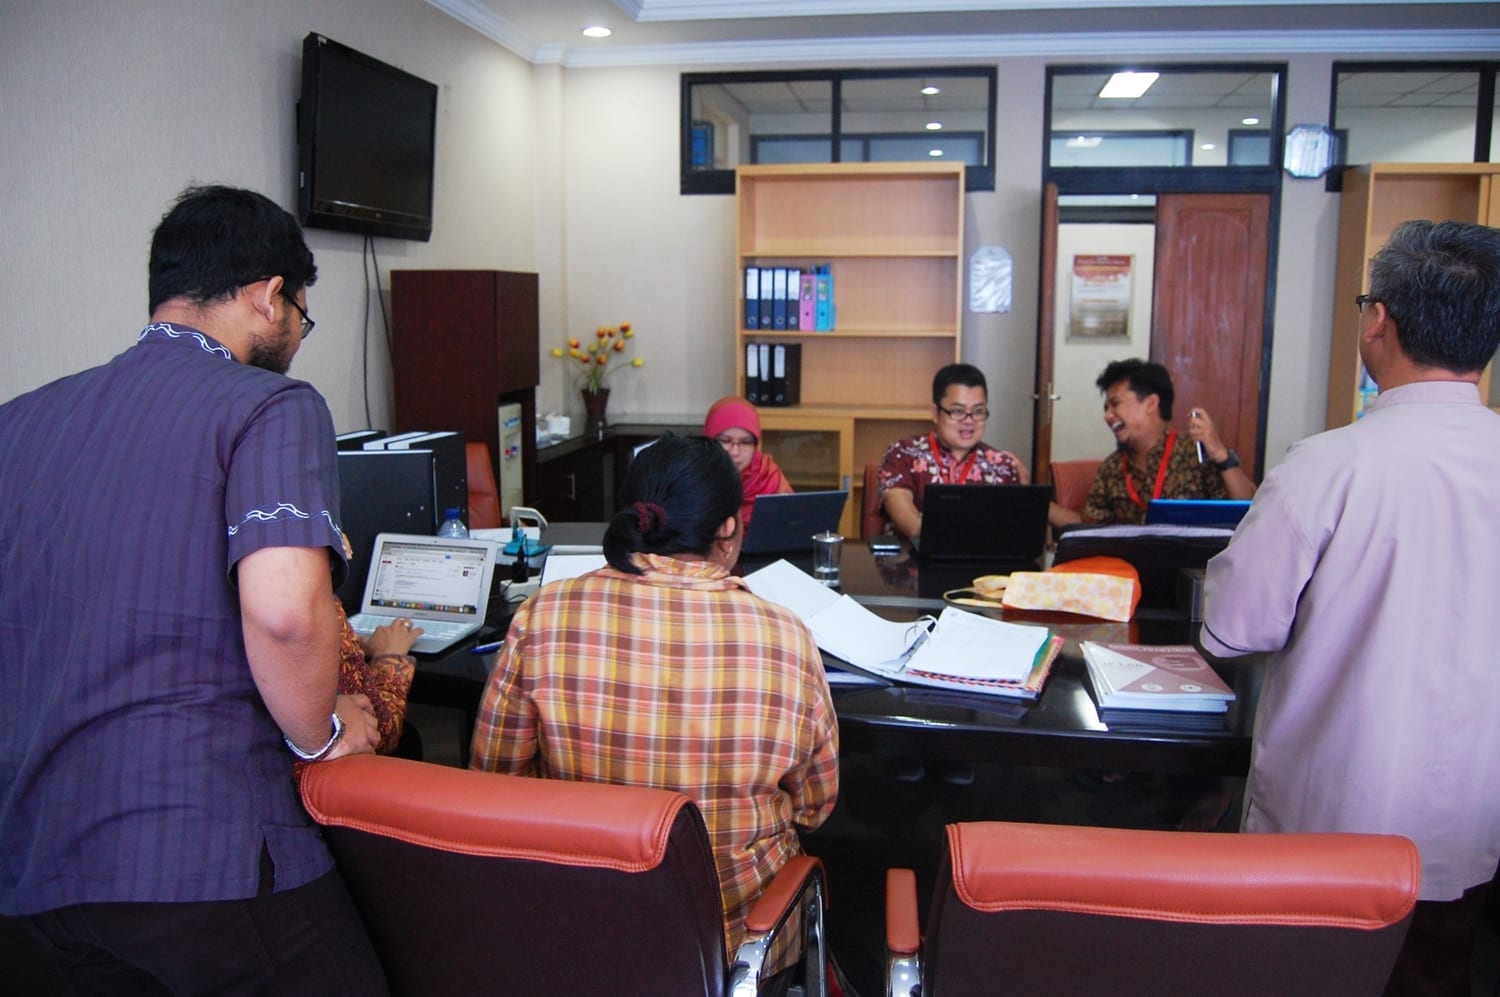 Gallery of Preparation of External Quality Audit